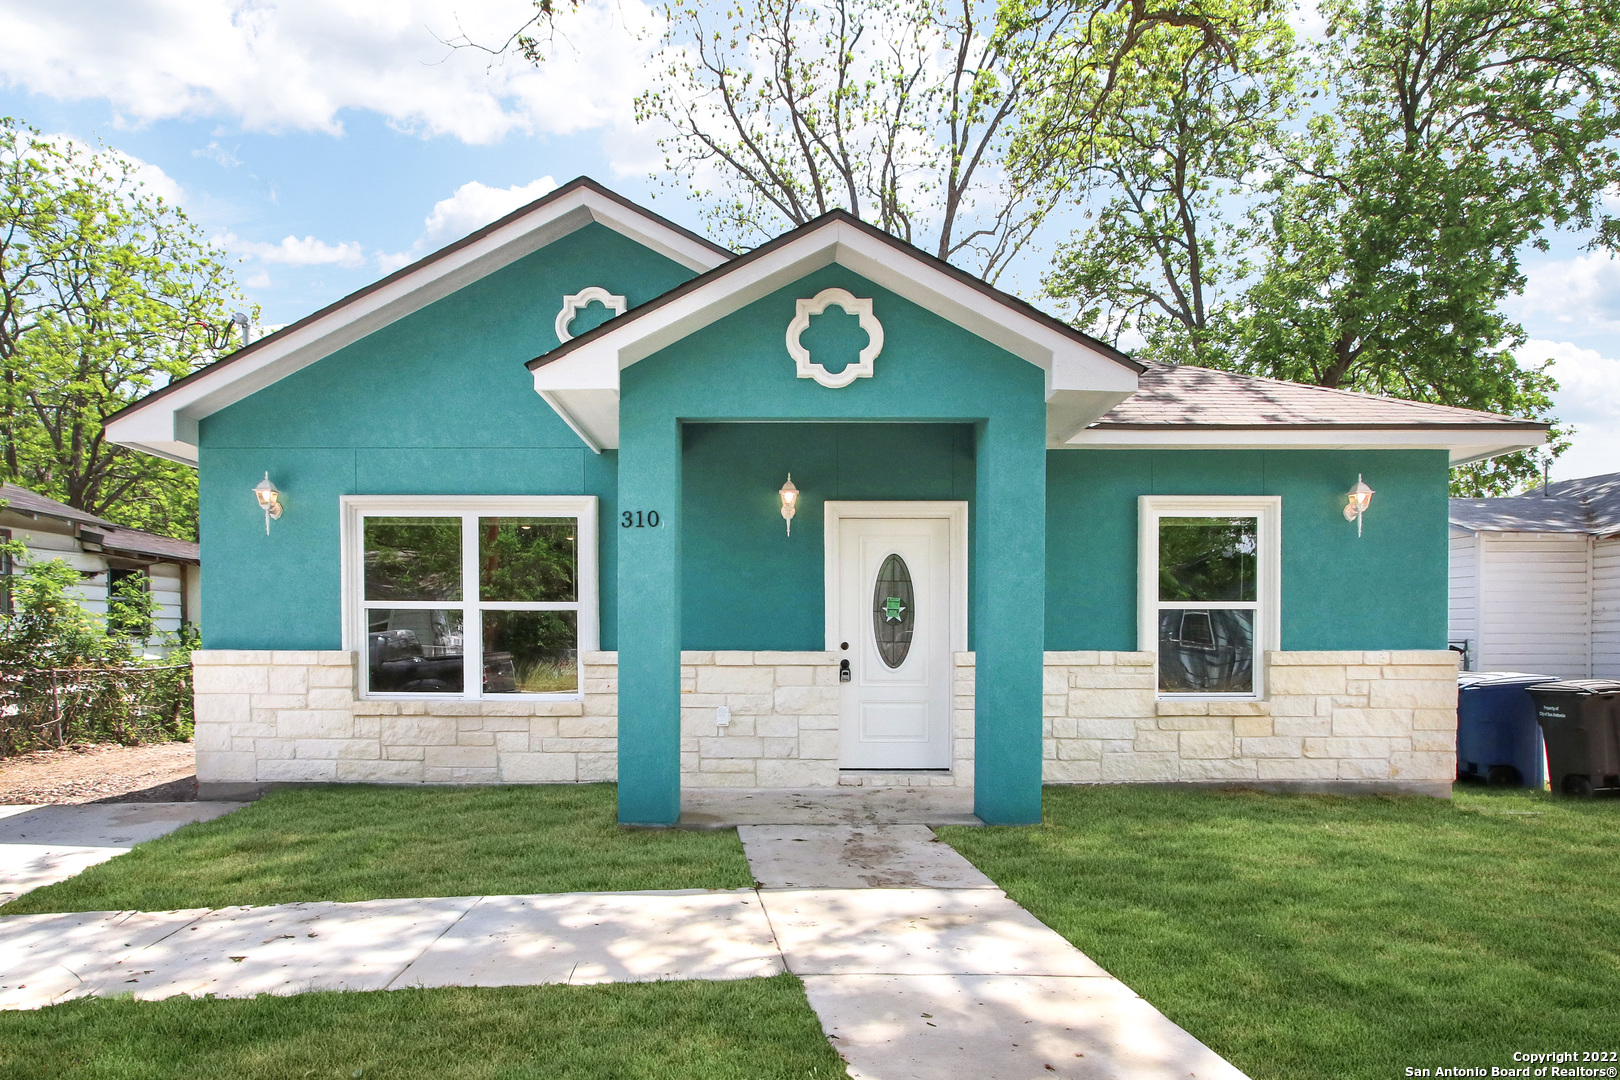 NEW NEW NEW! Easy access to I35 and close to many restaurants. This is a 3 bedroom 2 bath home ready for move in. Open and spacious layout, come tour today!  ****** OPEN HOUSE SATURDAY MAY 7TH 11-4pm ******